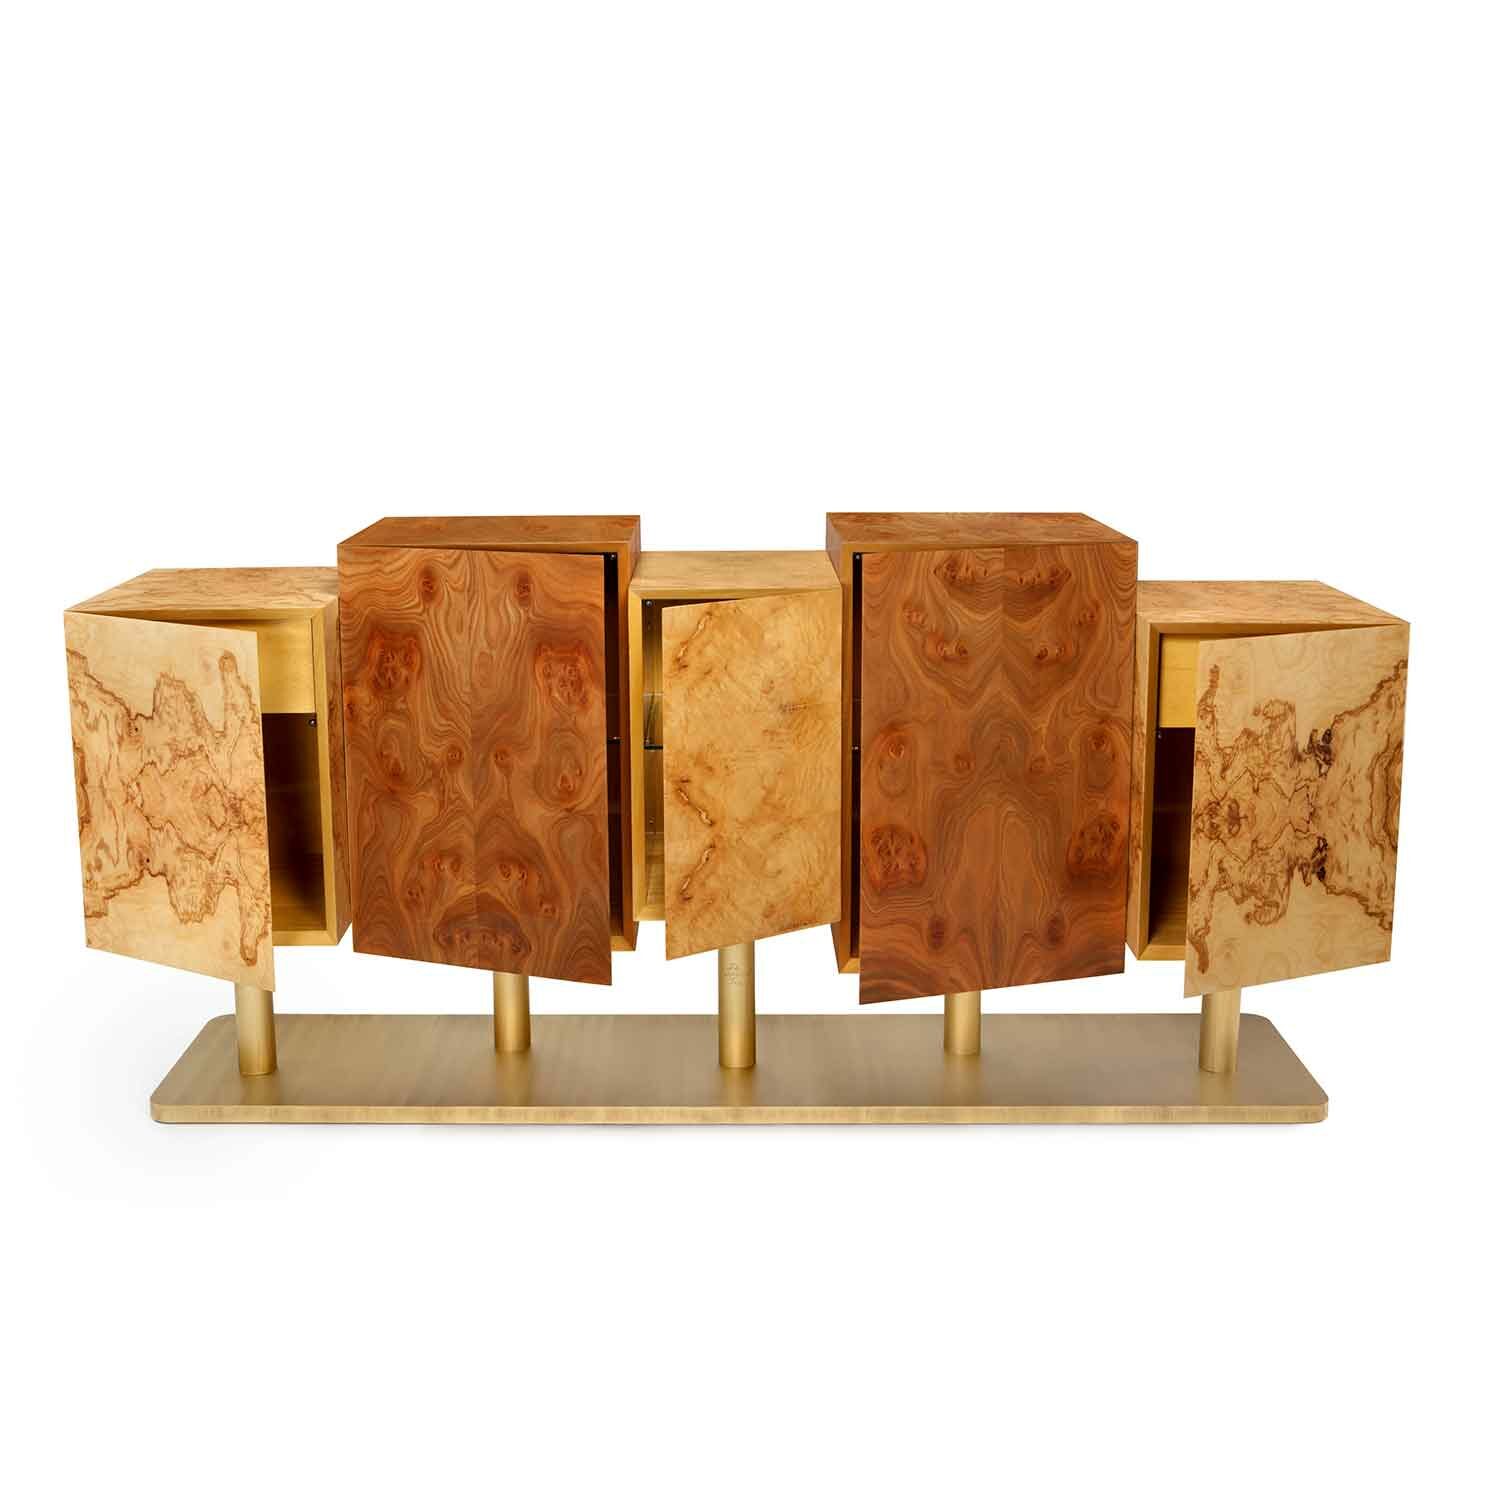 THE SPECIAL TREE Sideboard